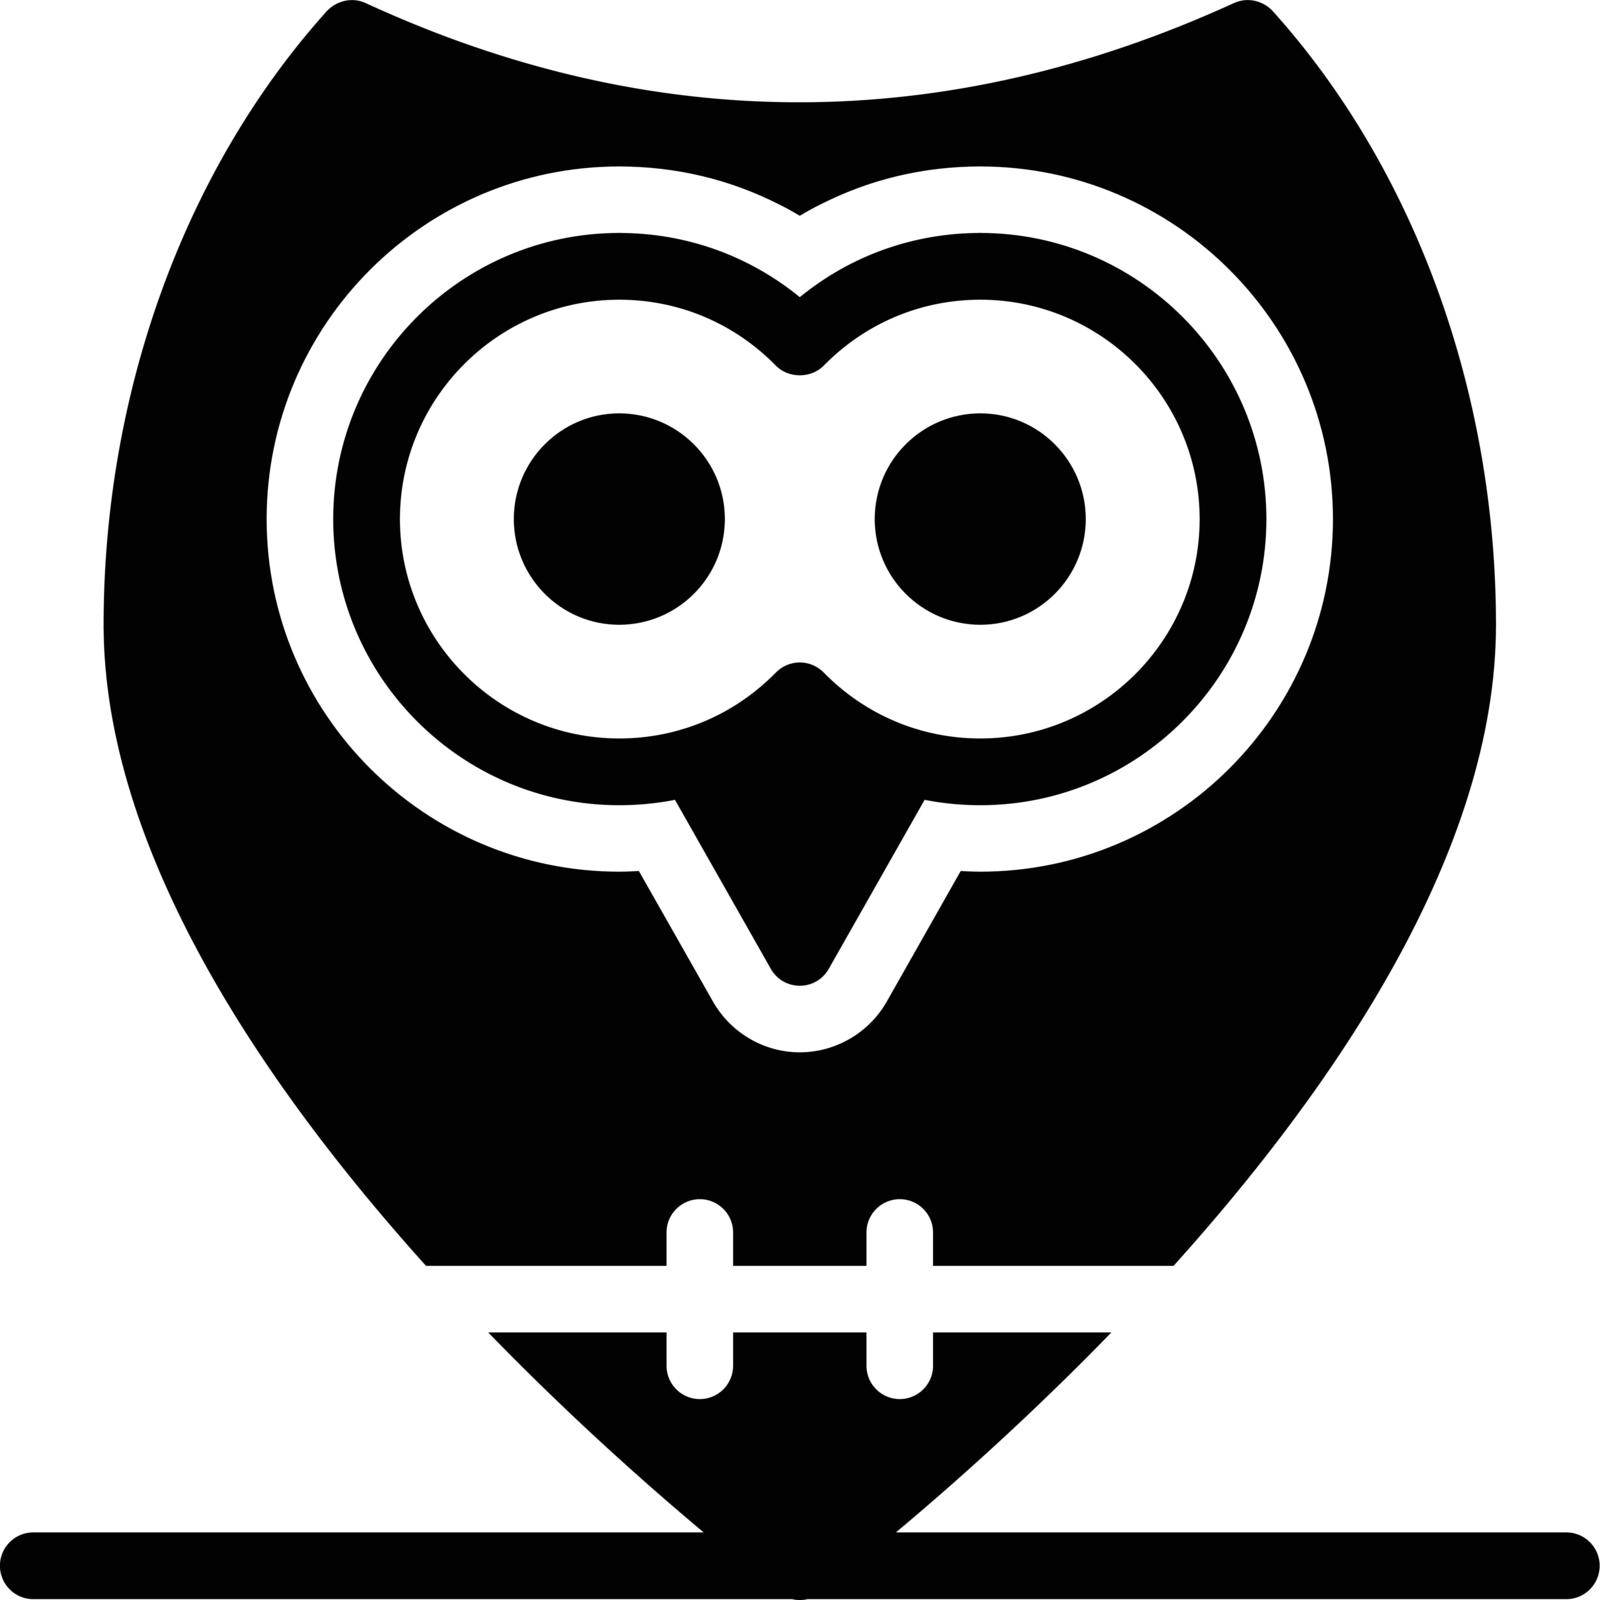 owl Vector illustration on a transparent background. Premium quality symmbols. Glyphs vector icons for concept and graphic design.